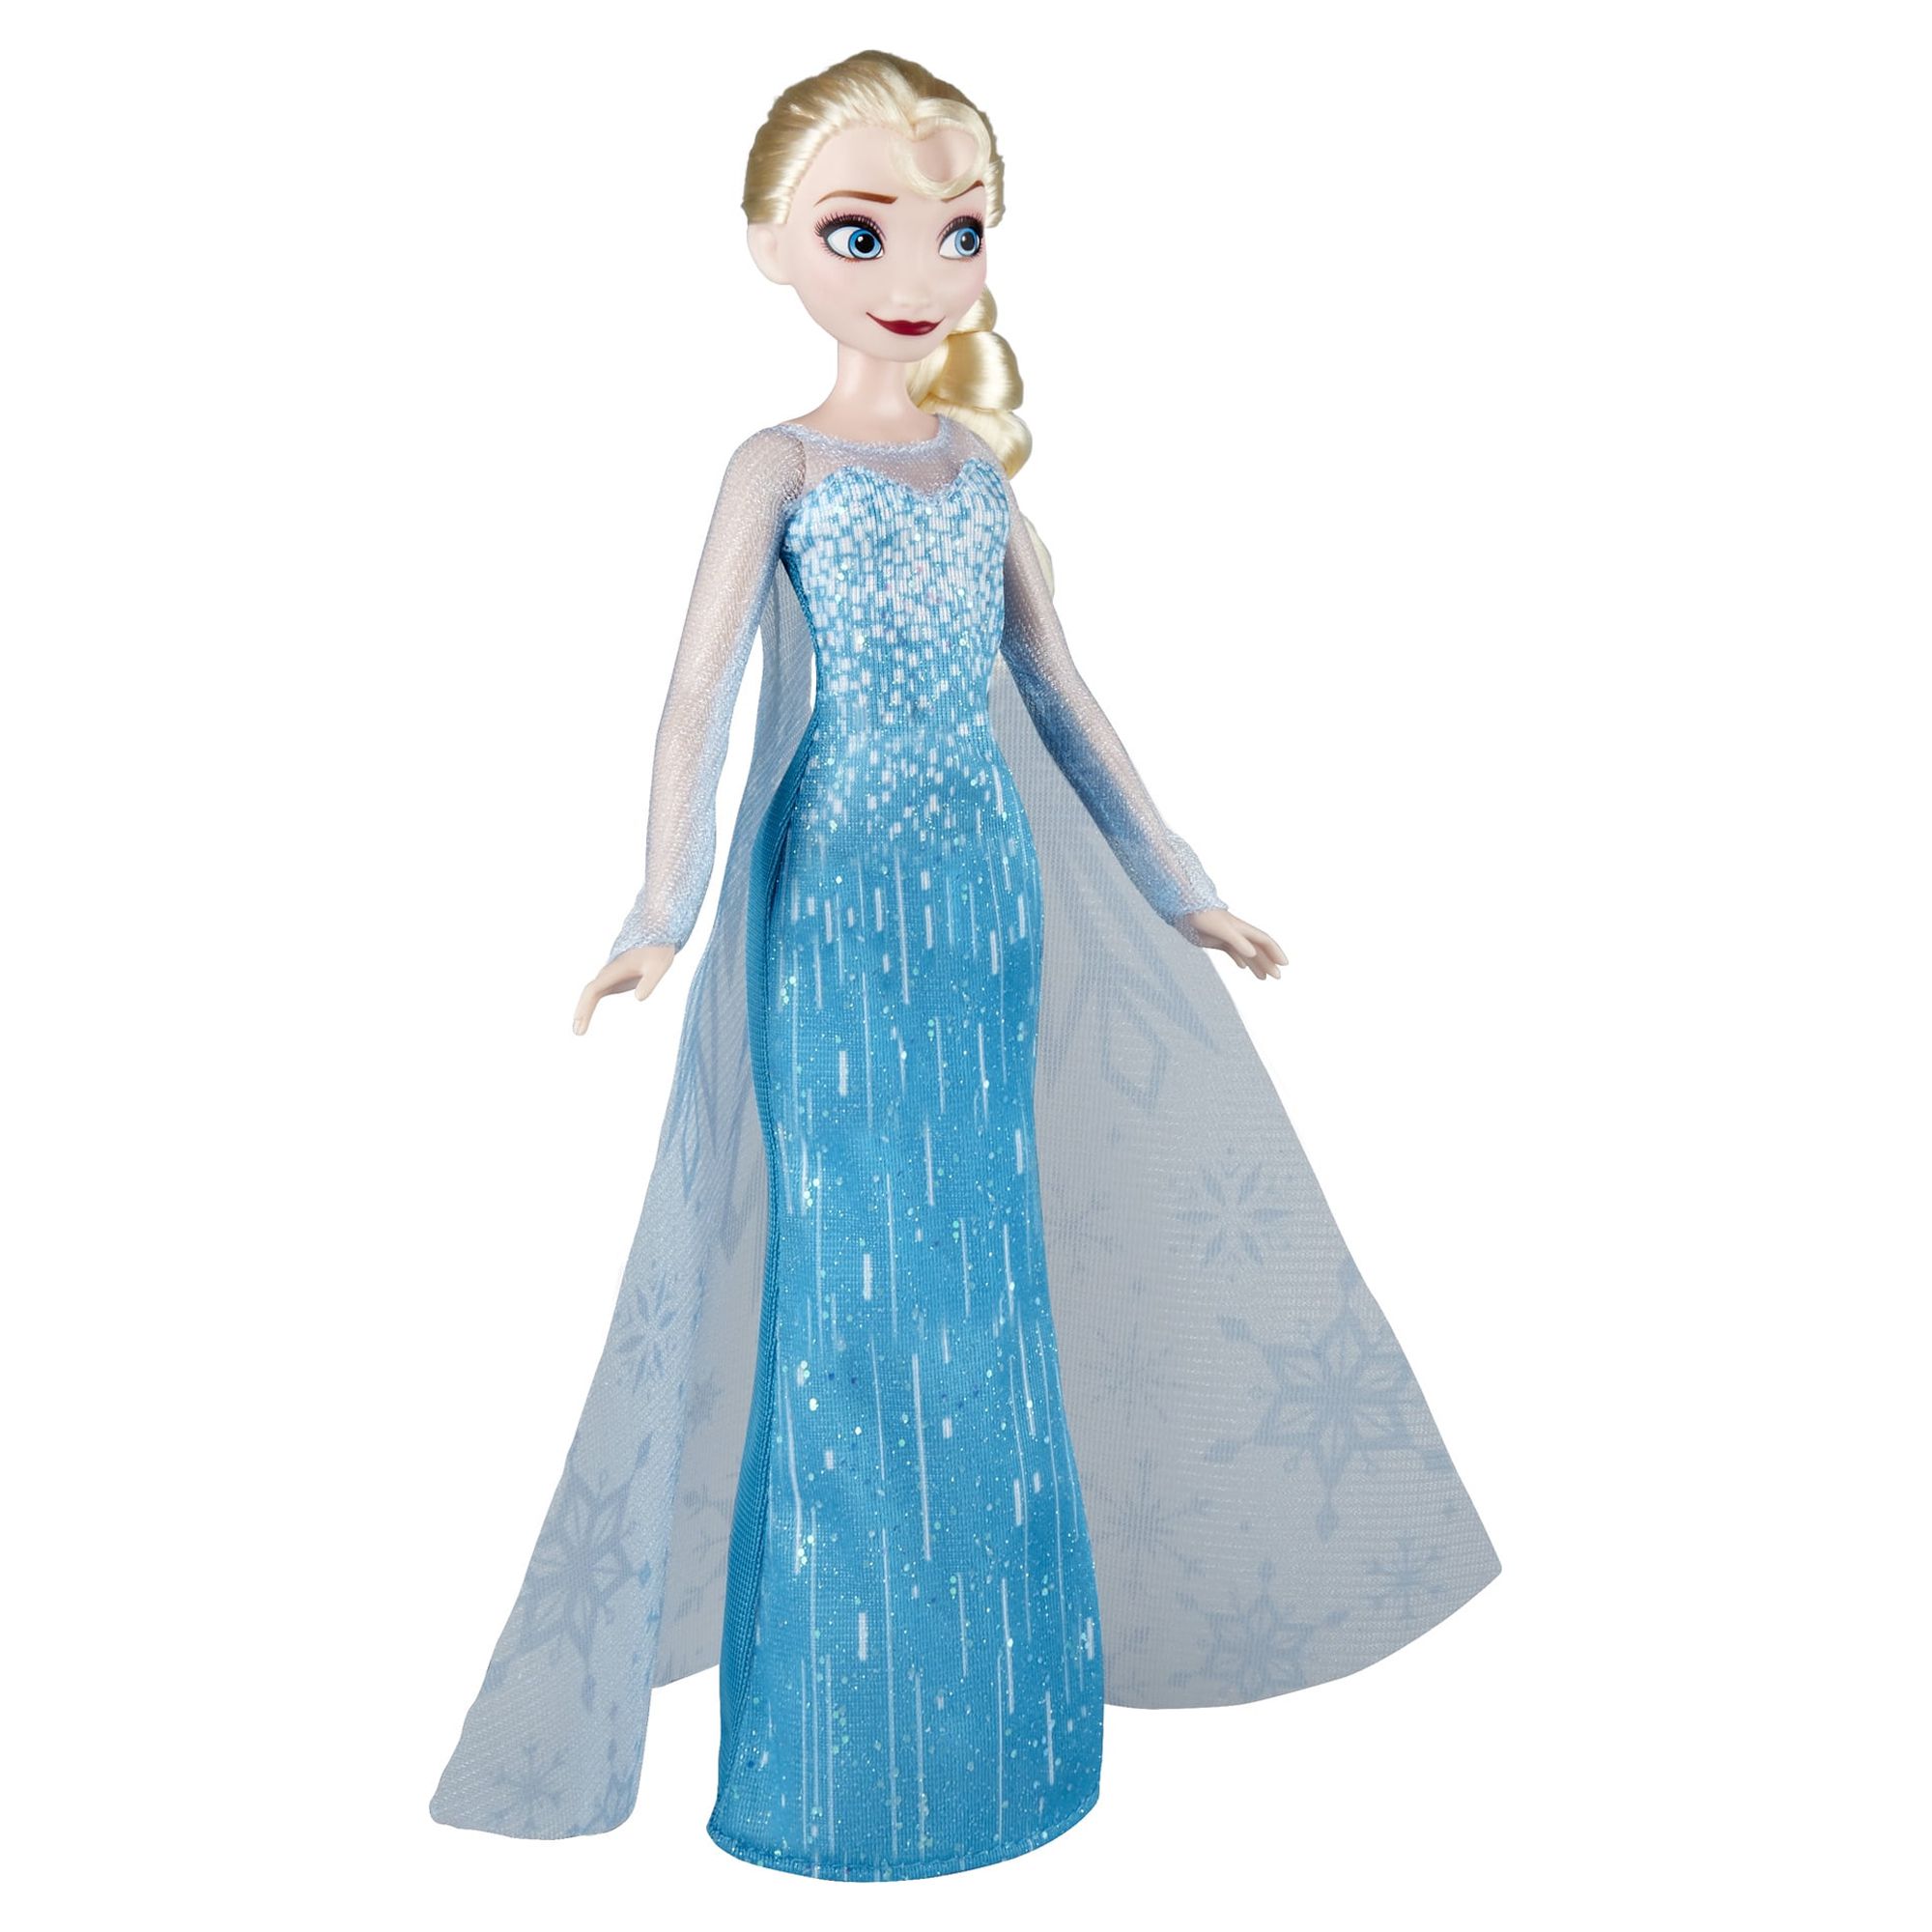 Disney Frozen Classic Fashion Elsa, for Kids Ages 3 and up, Includes Outfit and Shoes - image 1 of 7